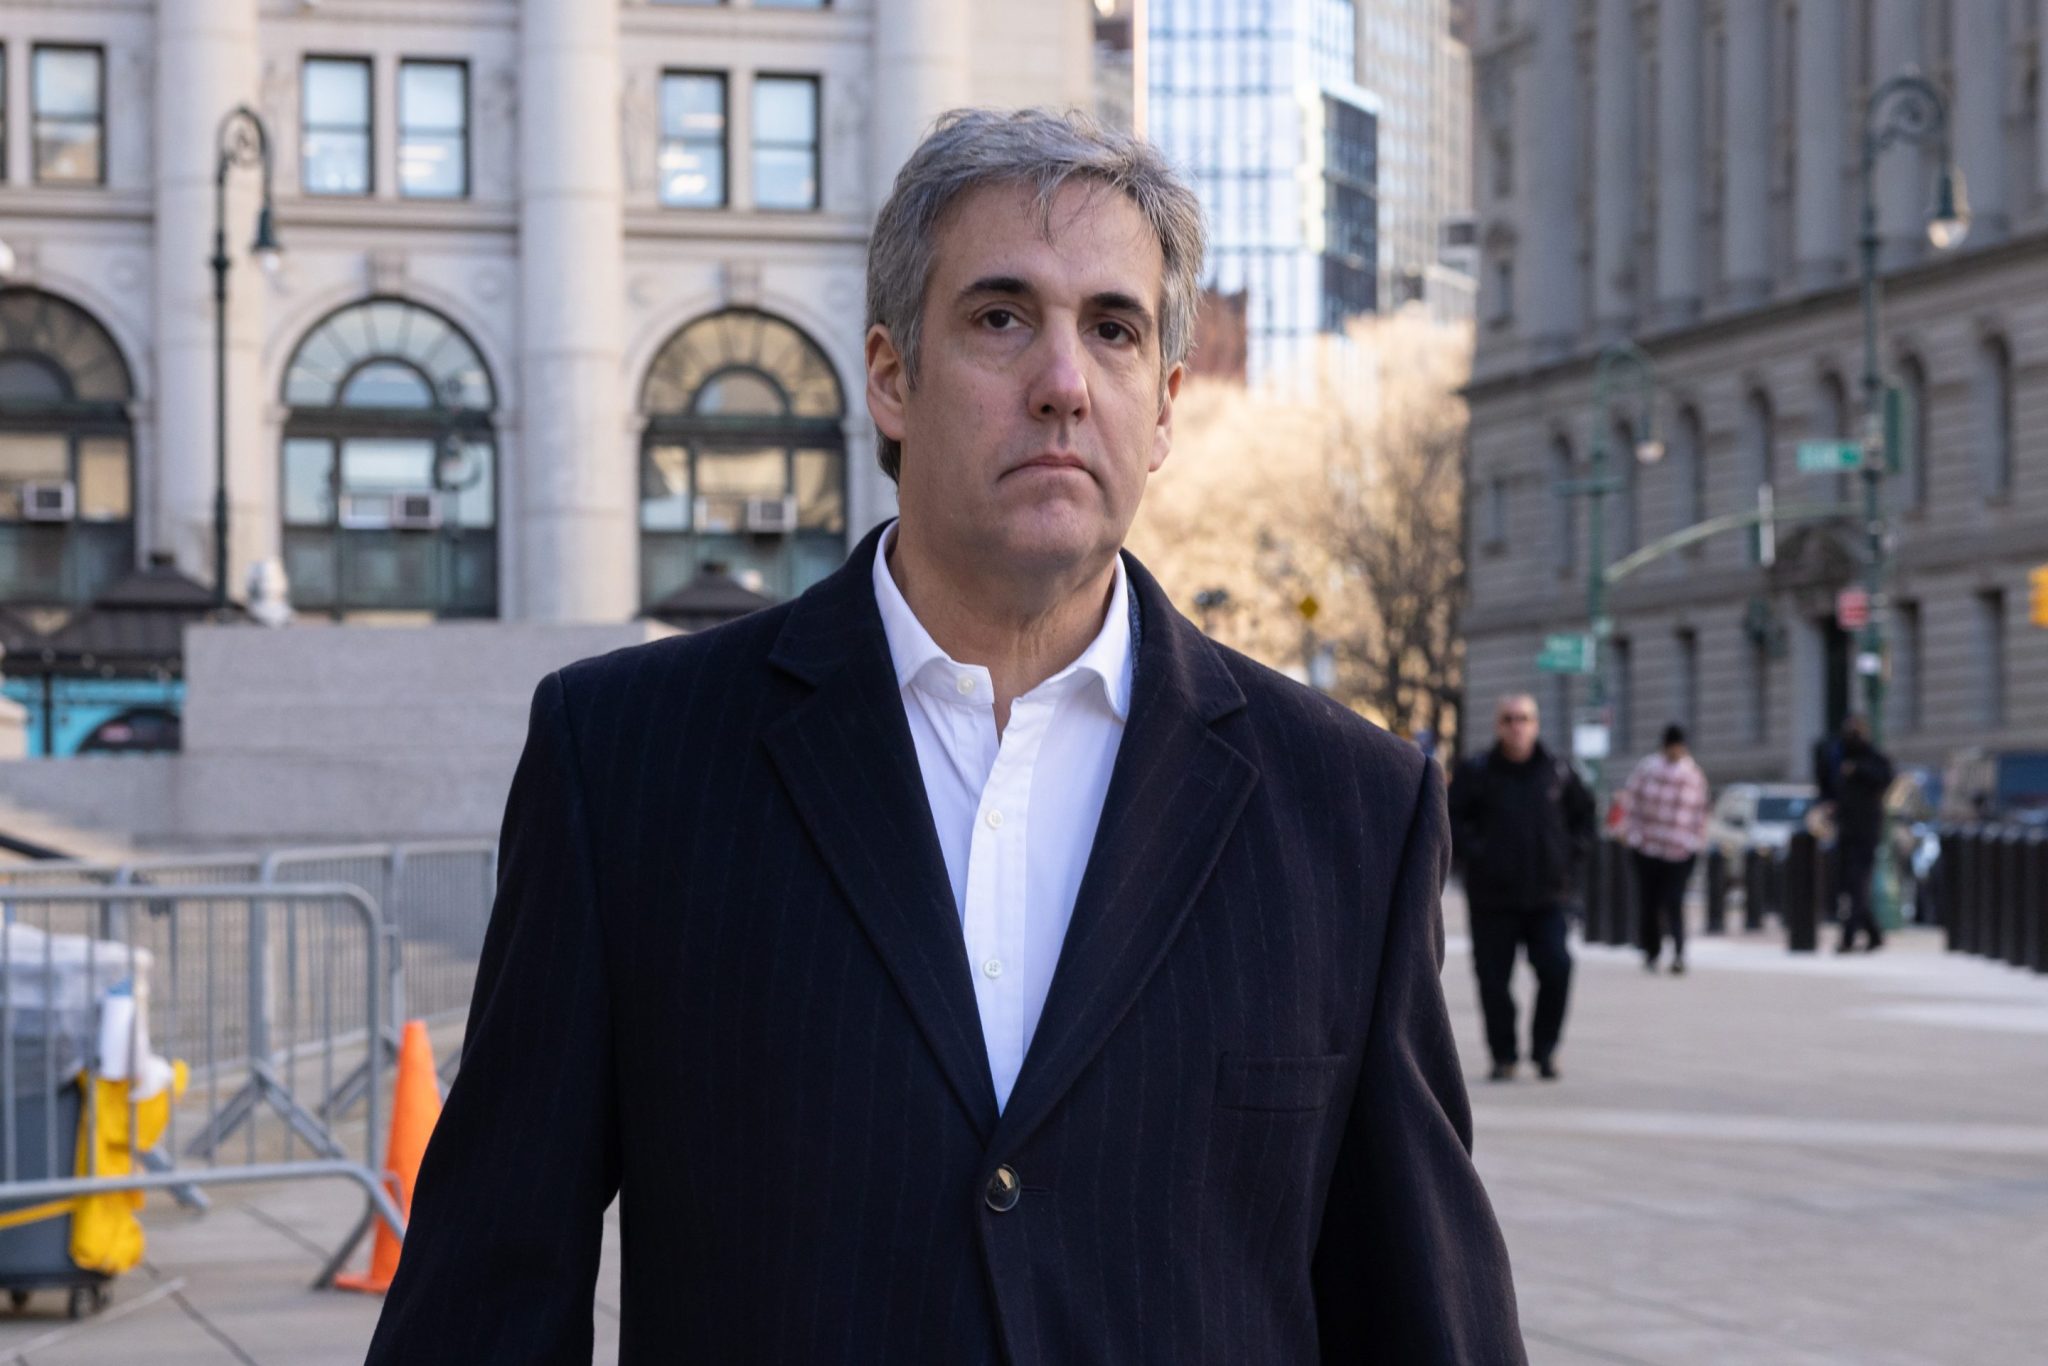 Former Trump fixer Michael Cohen admits sending fake legal cases generated by AI to his attorney, who then submitted them in court